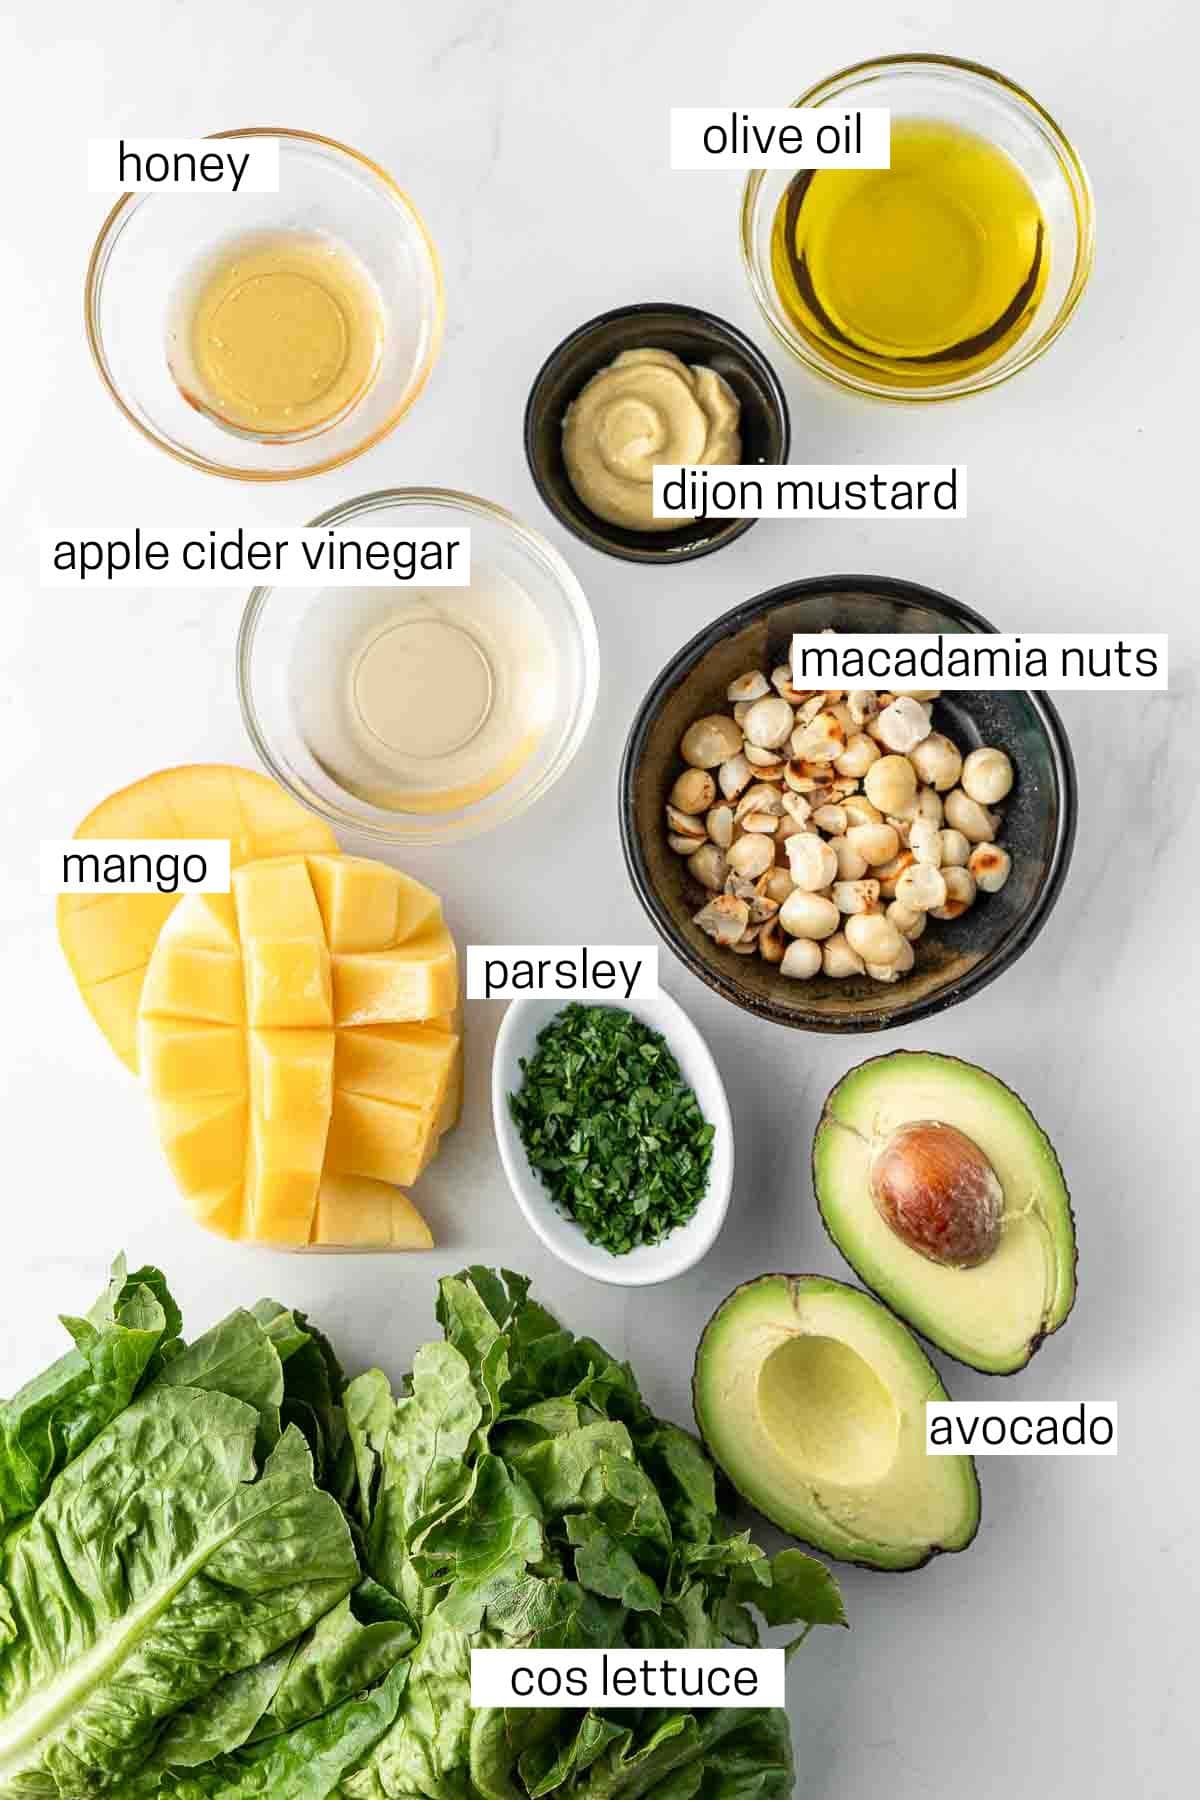 All ingredients for avocado and mango salad laid out in small bowls.